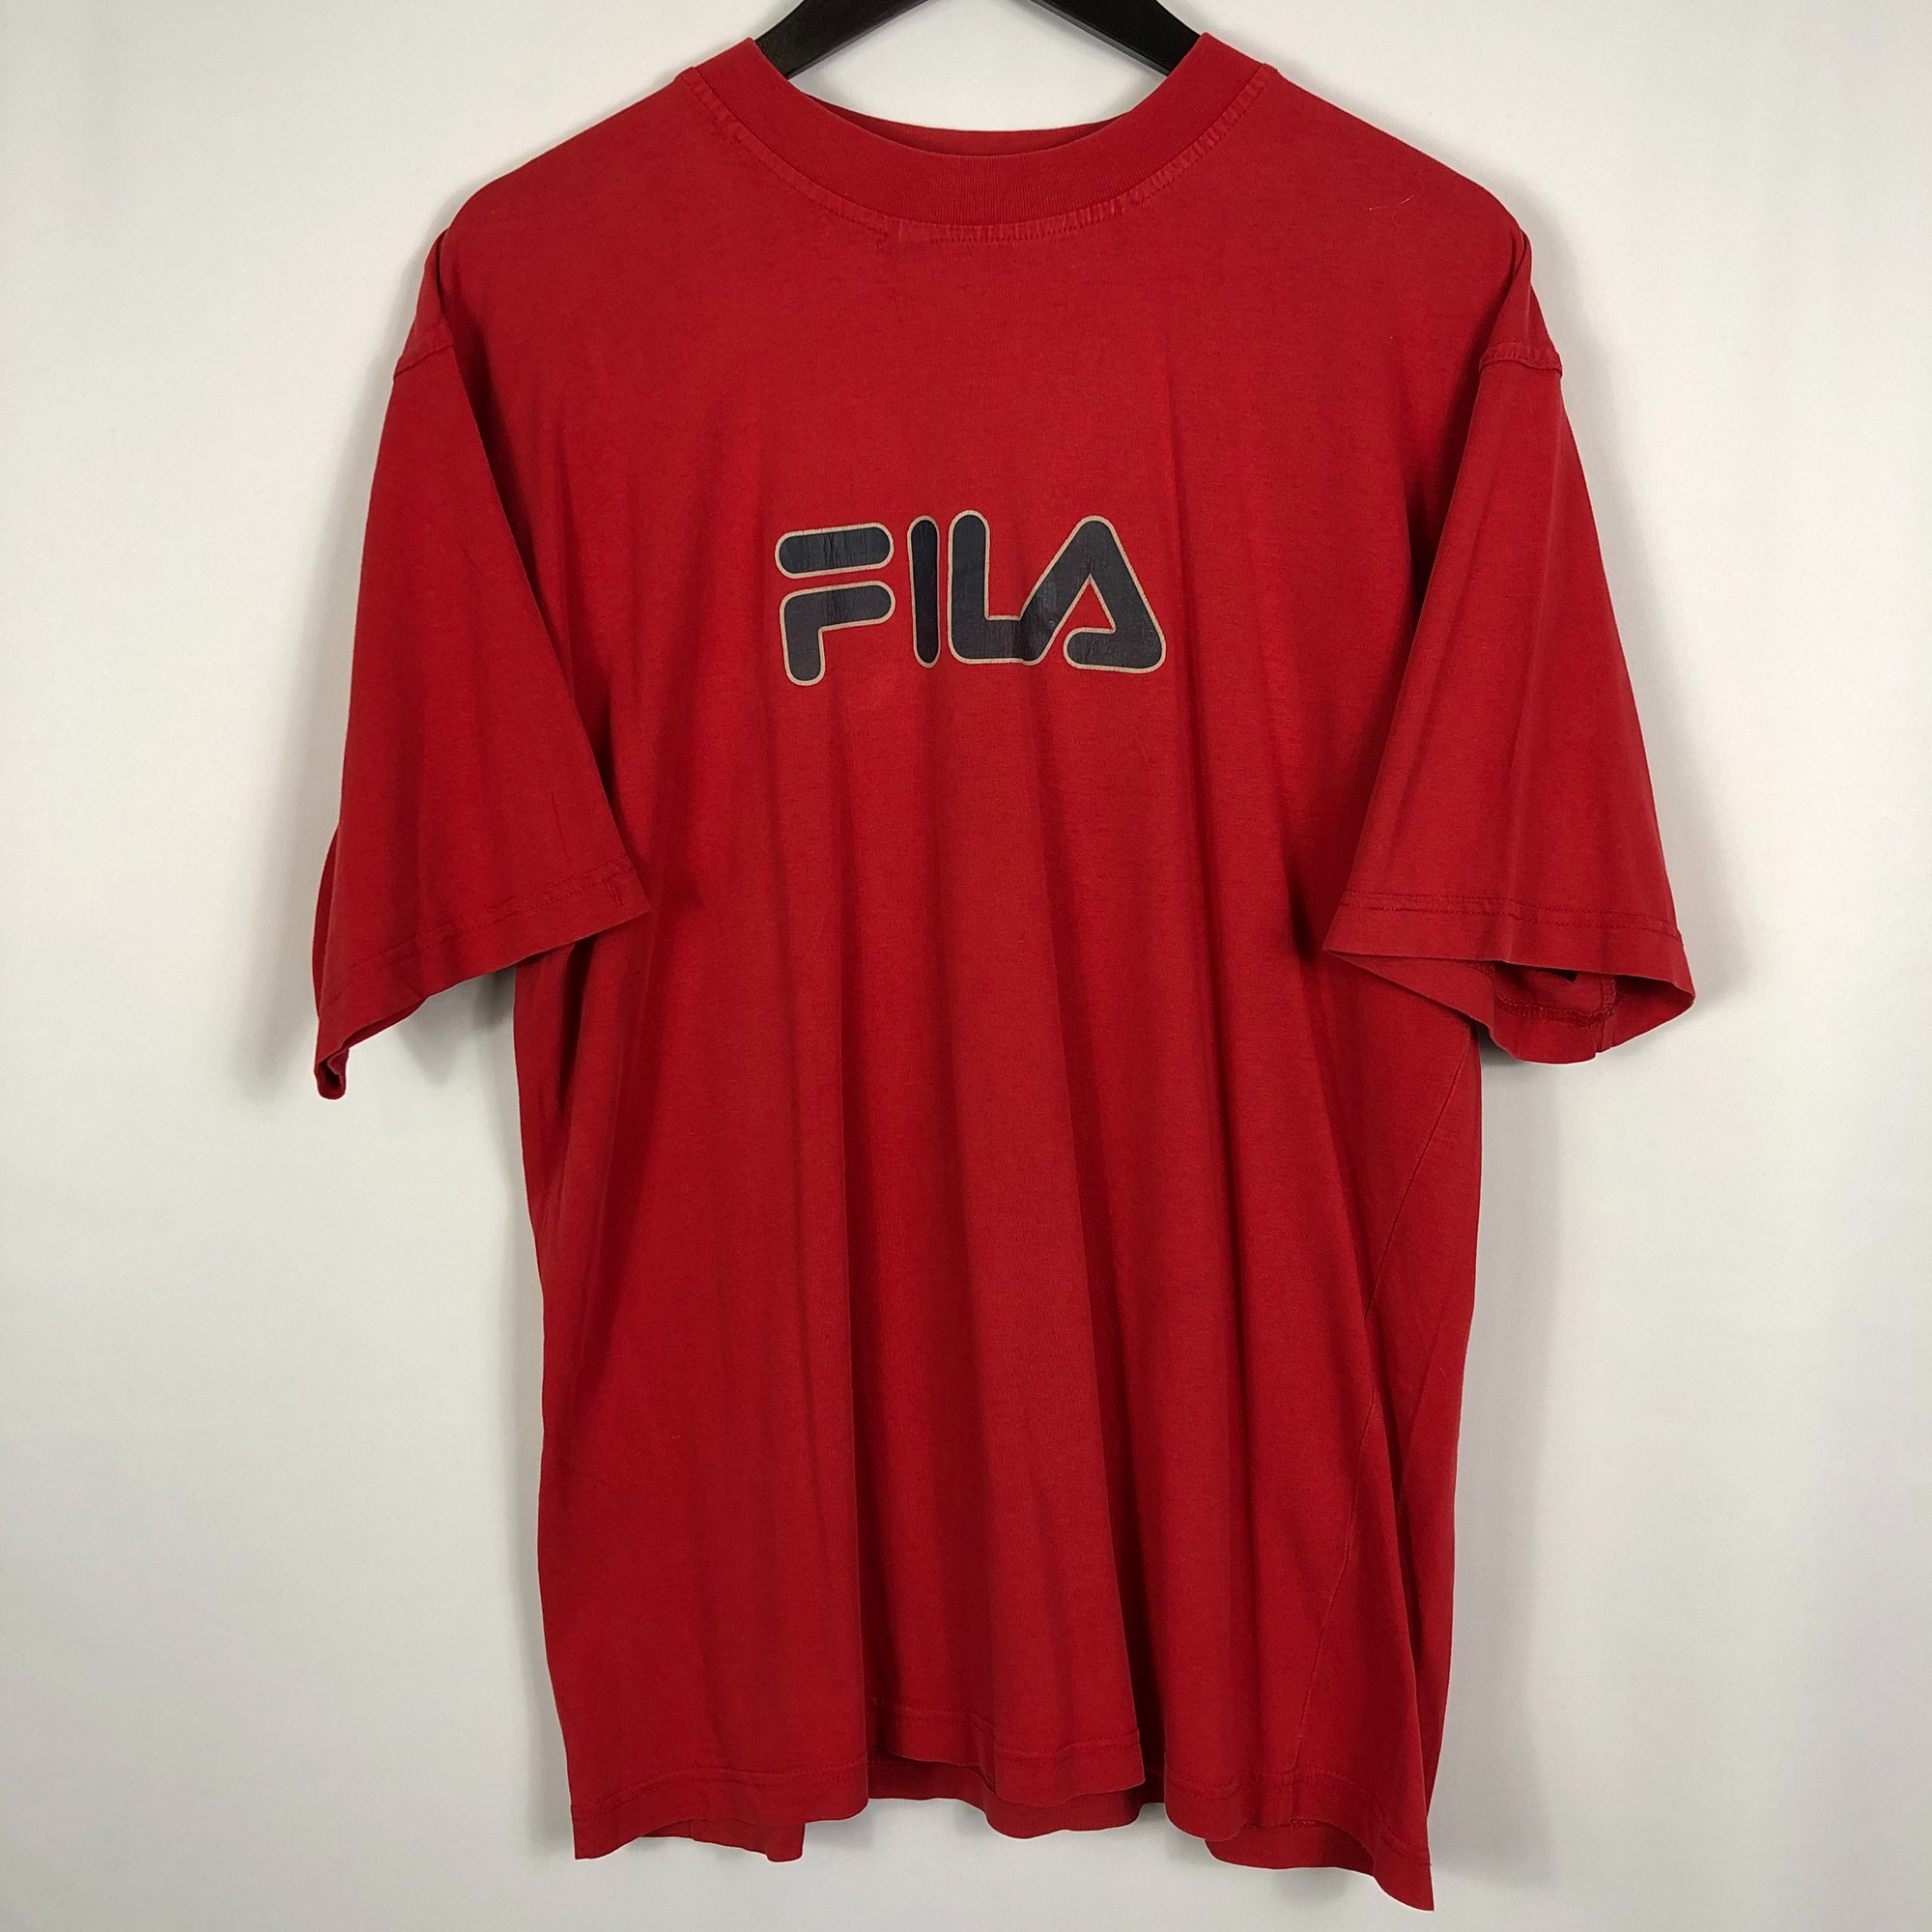 Vintage Fila Spellout Tee in Red - Men’s Large/Women’s XL